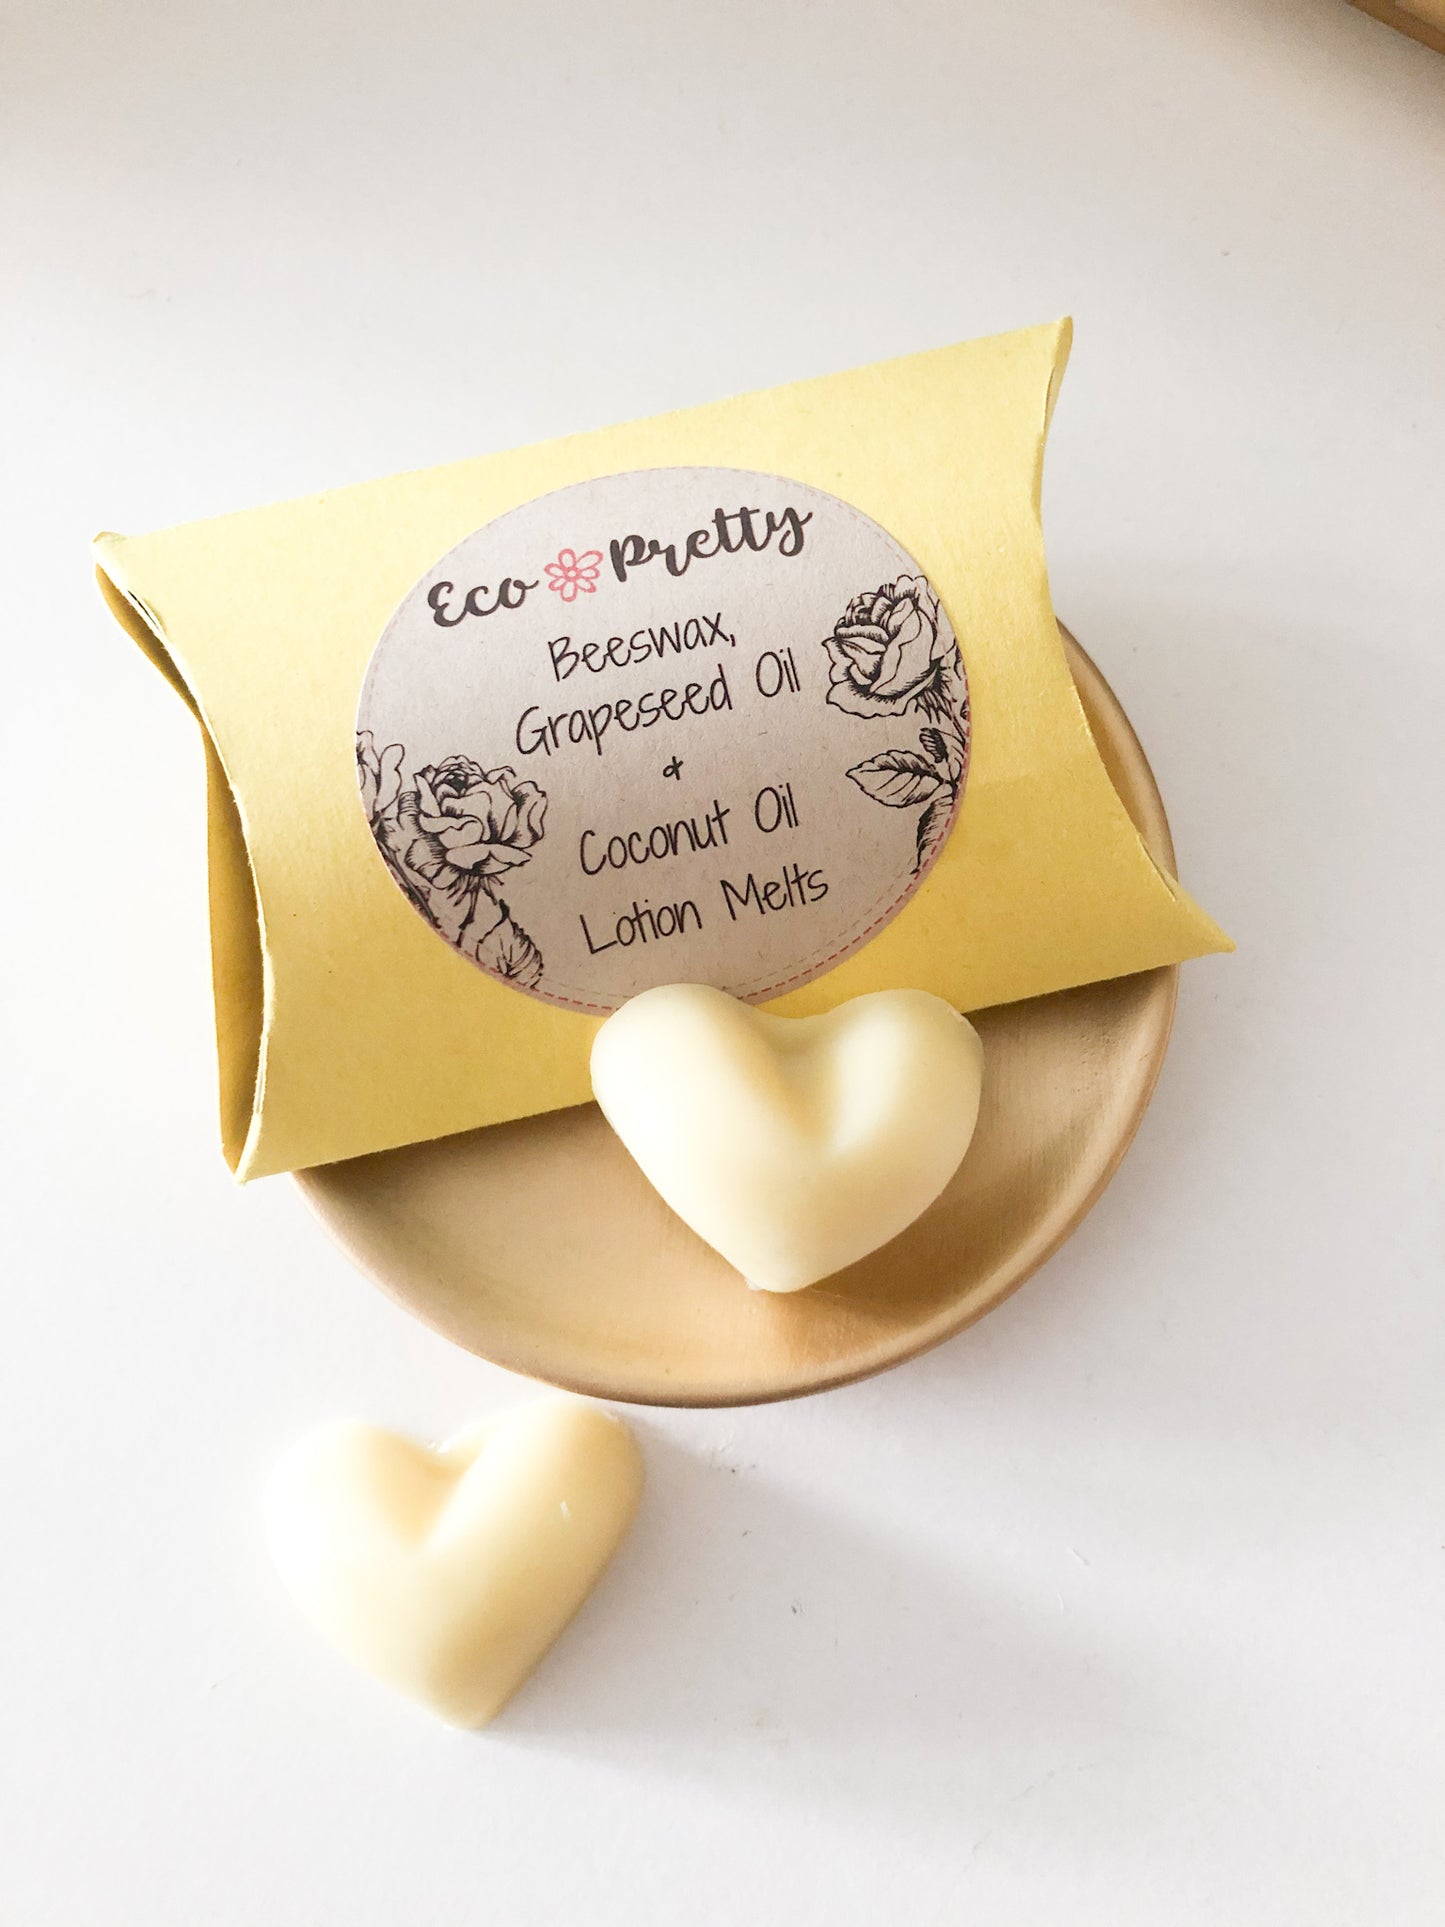 Eco Pretty Zero Waste Beeswax, Grapeseed and Coconut Oil Lotion Bars - Le Prix Fashion & Consulting